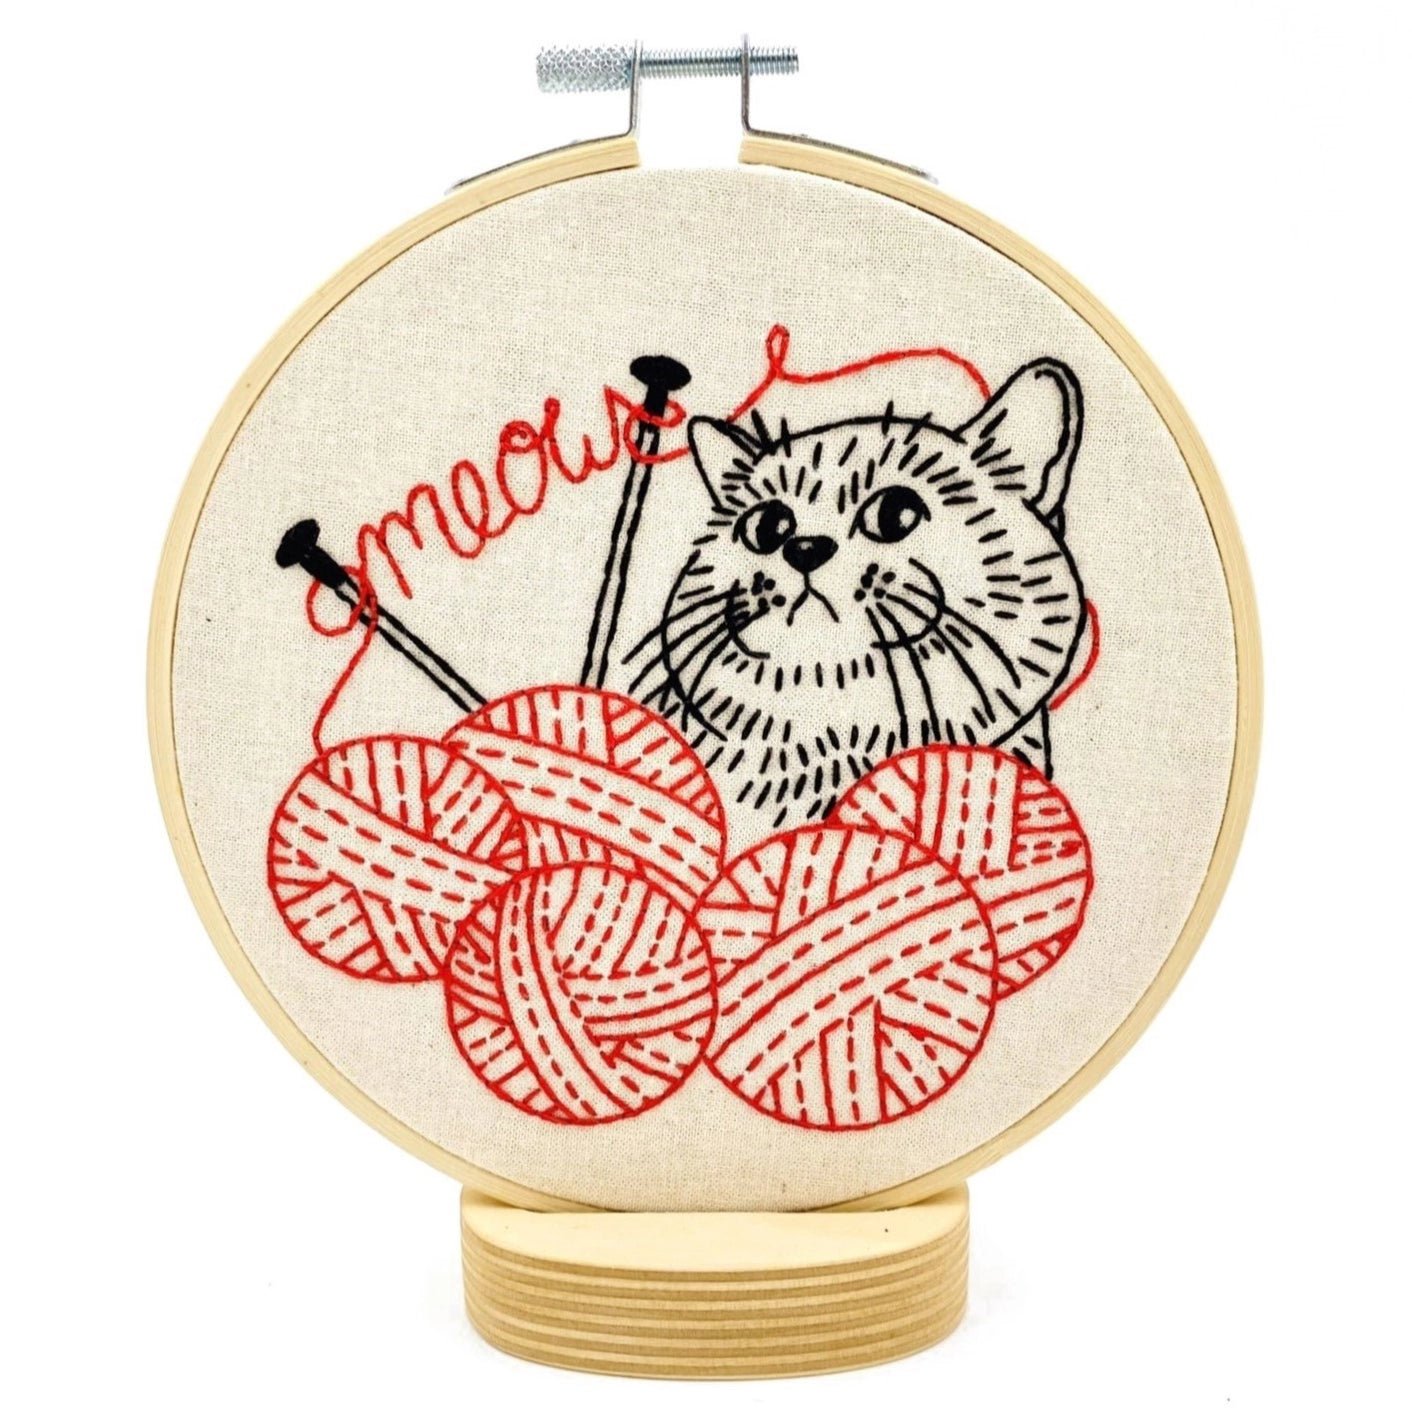 Kitten with Knitting Complete Embroidery Kit - Hook, Line, & Tinker Embroidery Kits - The Little Yarn Store